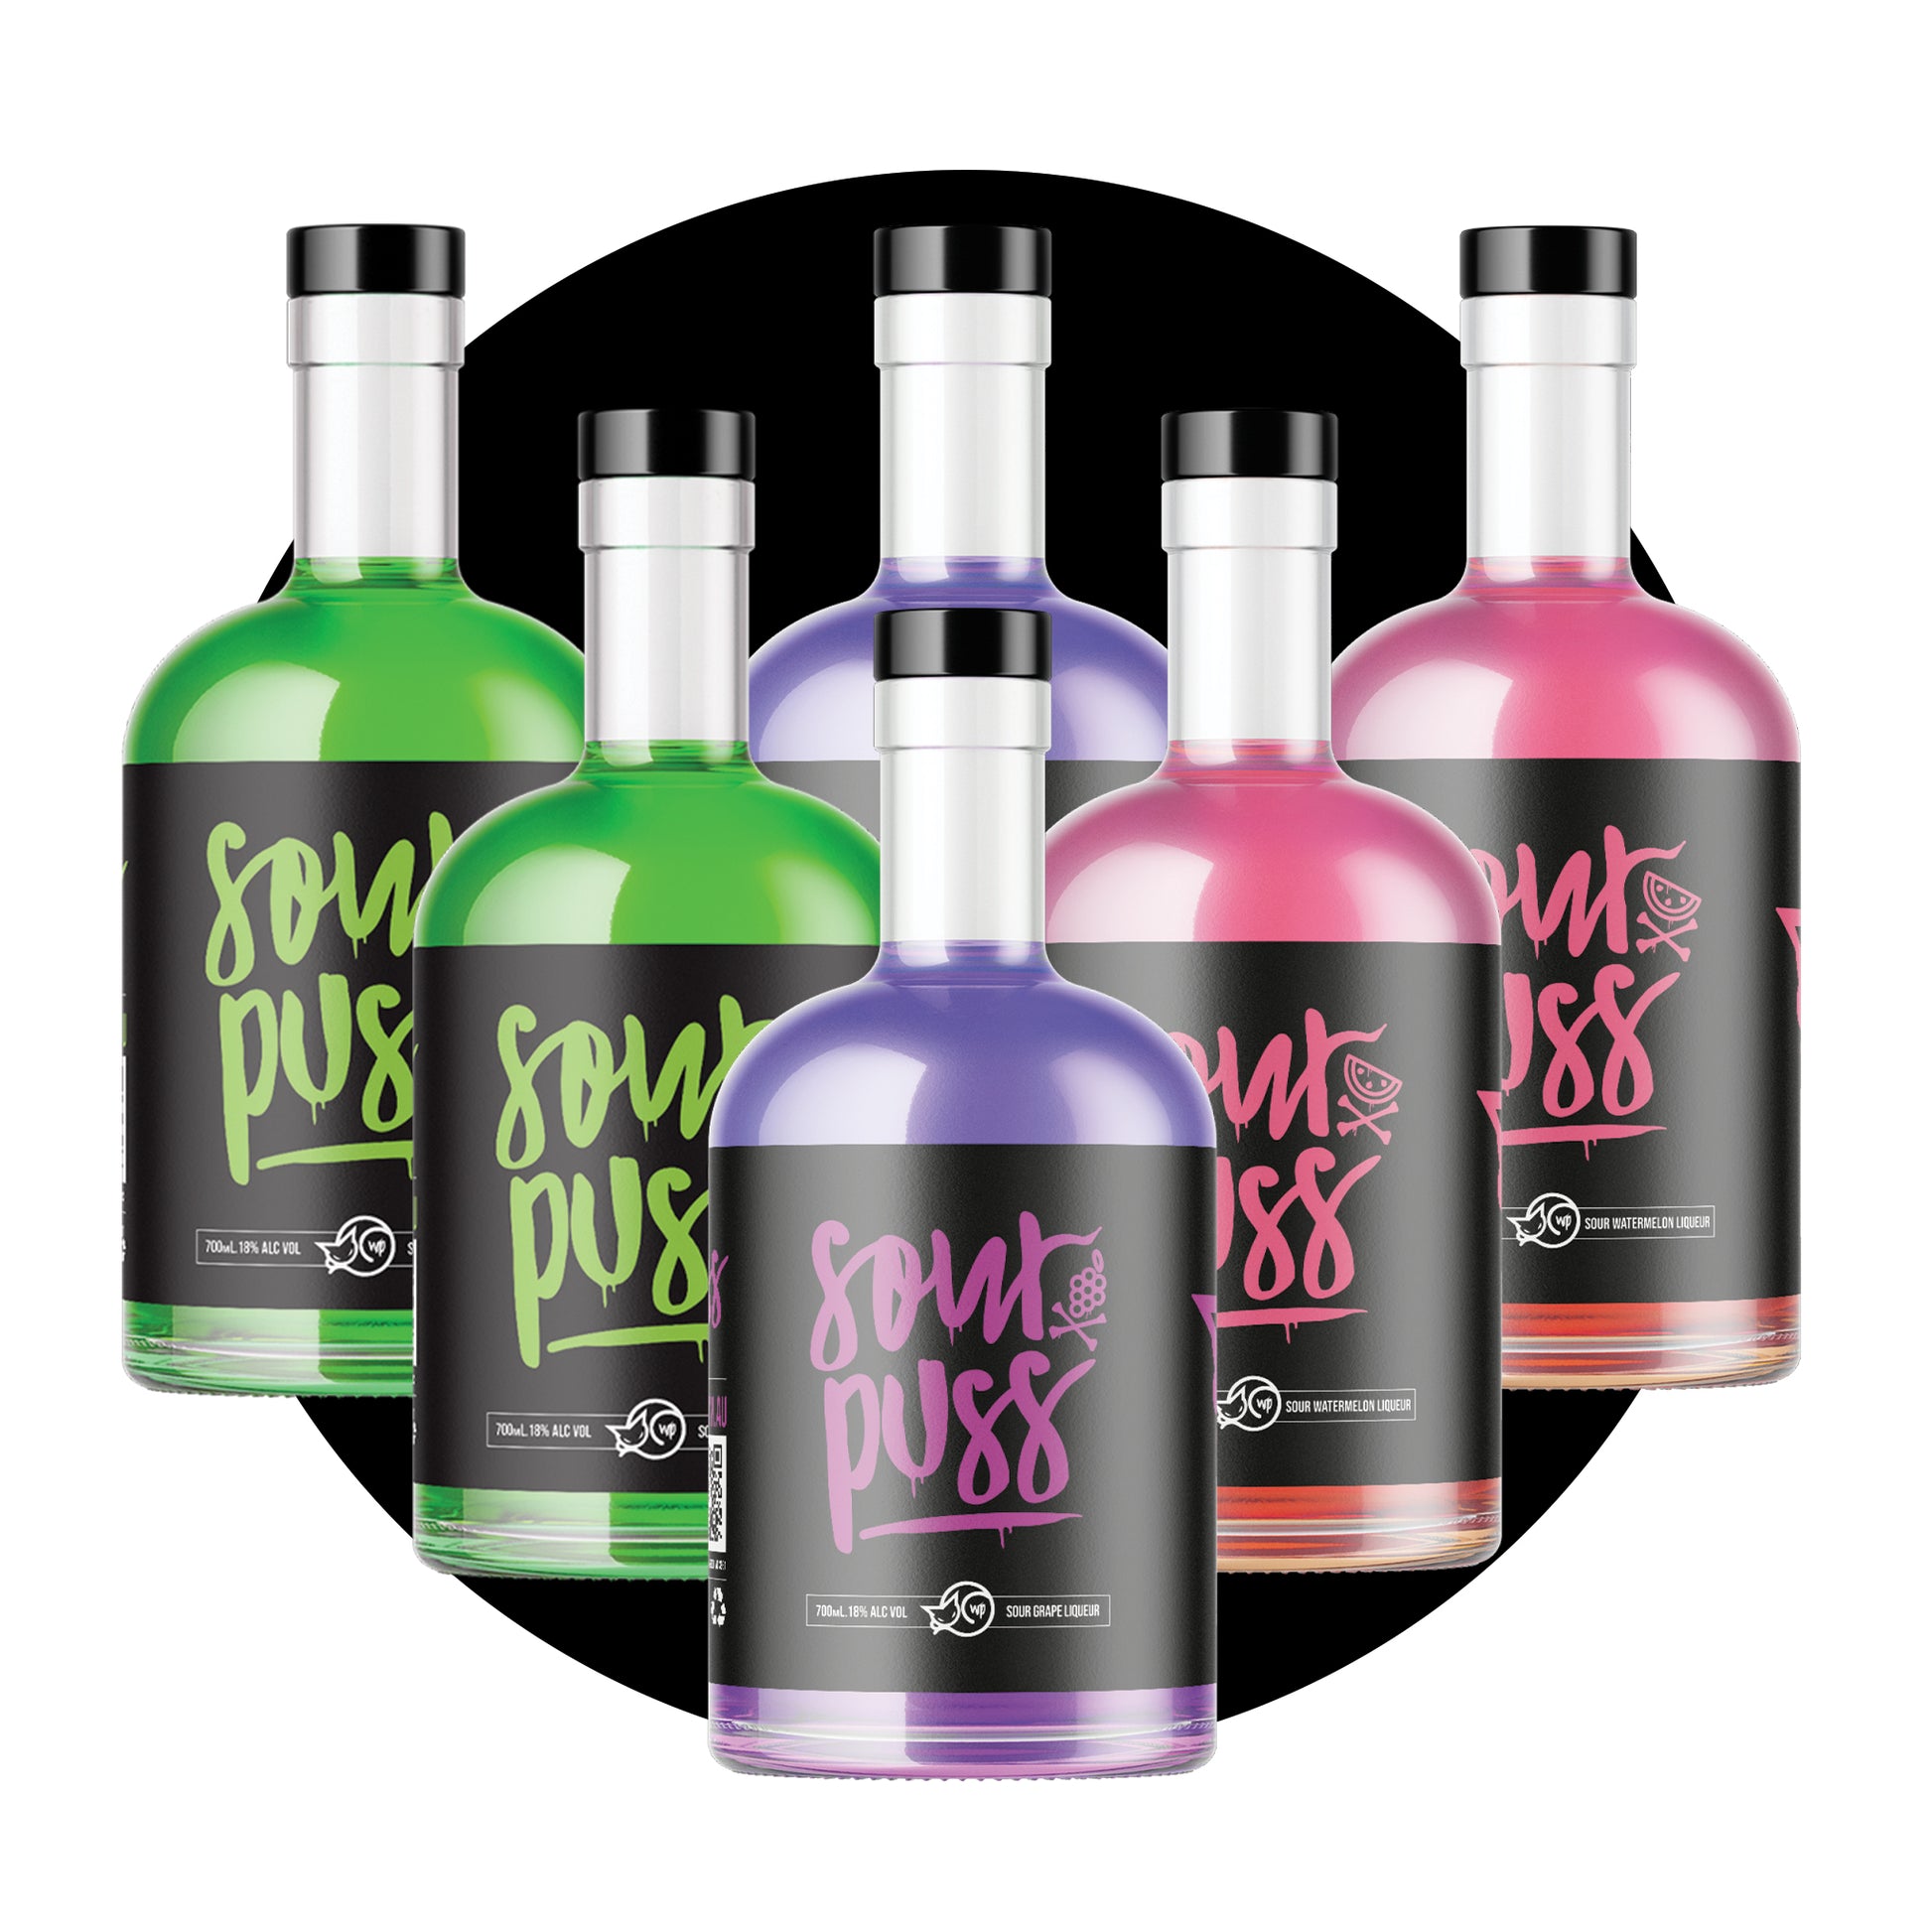 6 Pack Sour Puss Mix - 80Proof 